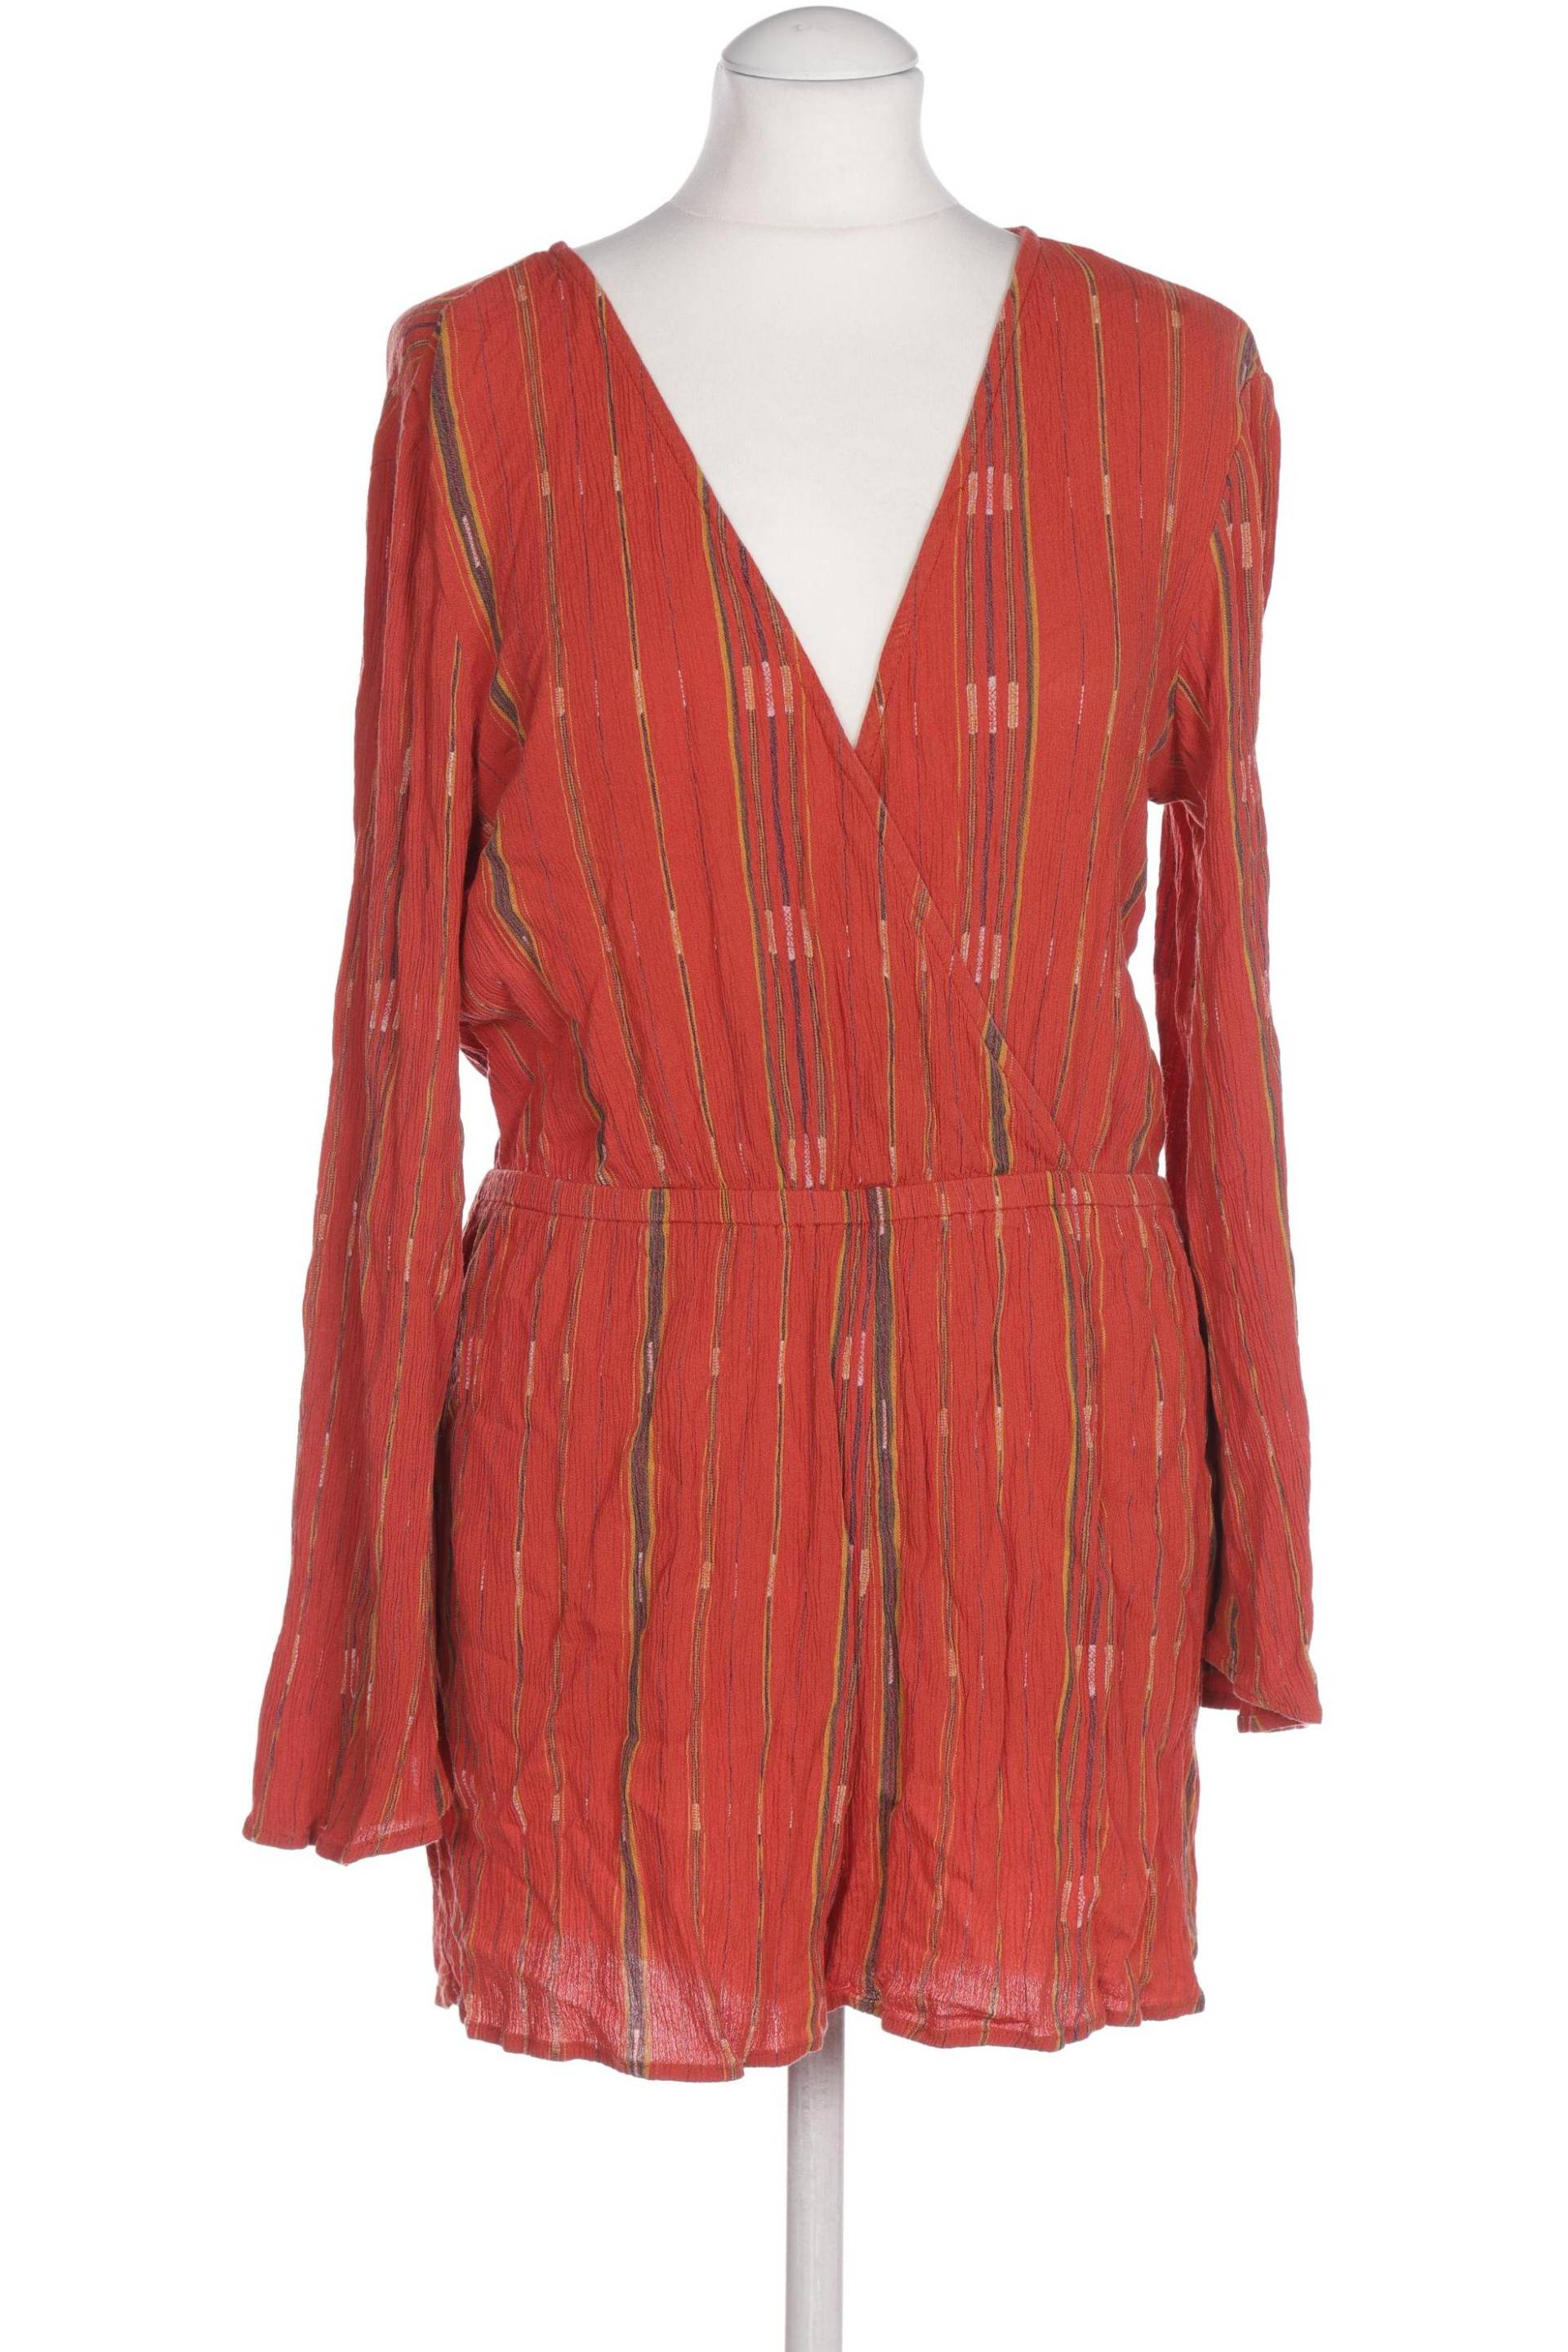 Urban Outfitters Damen Jumpsuit/Overall, rot, Gr. 38 von Urban Outfitters